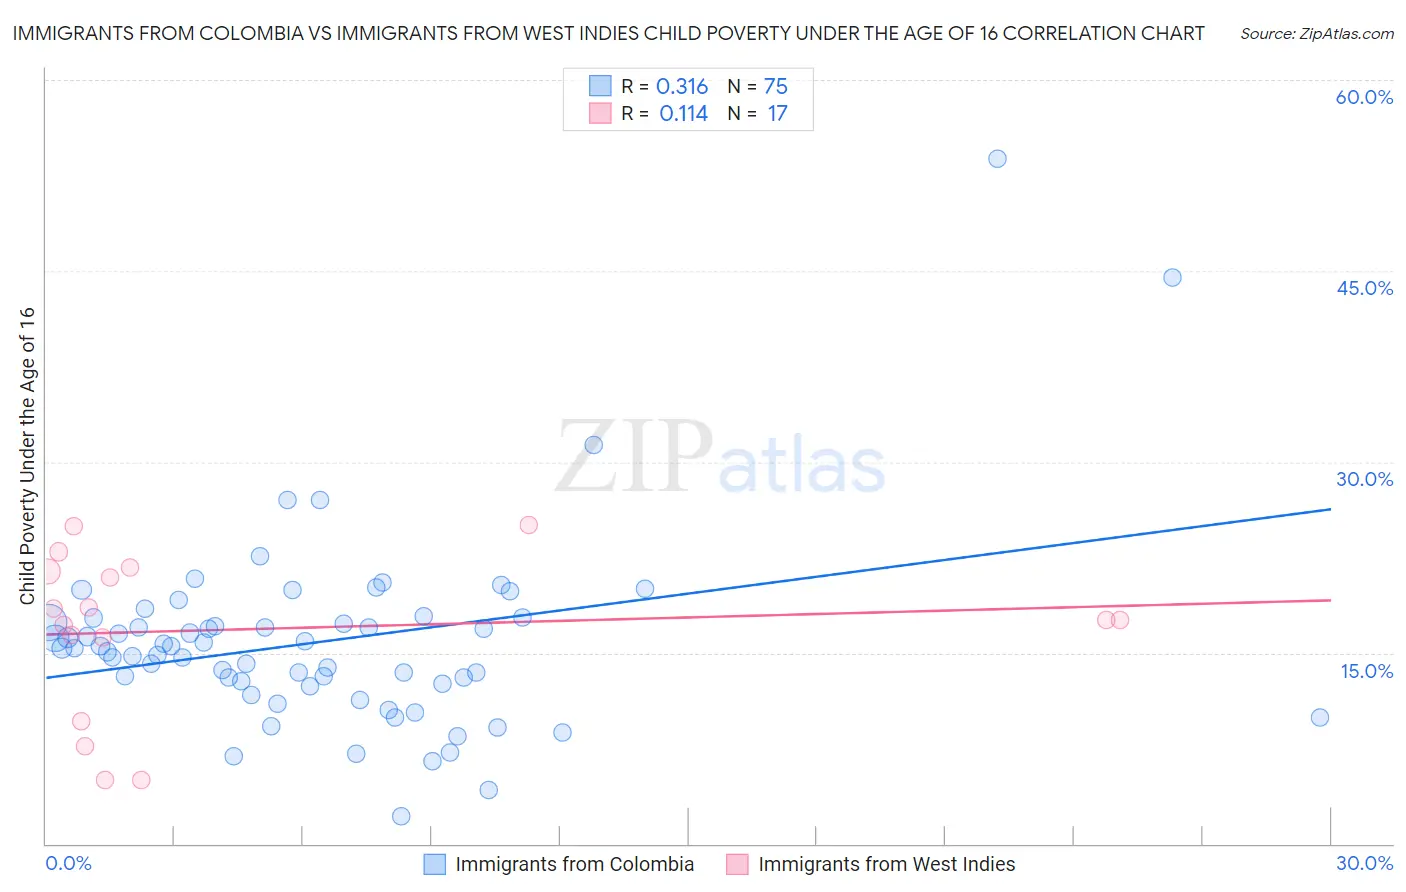 Immigrants from Colombia vs Immigrants from West Indies Child Poverty Under the Age of 16